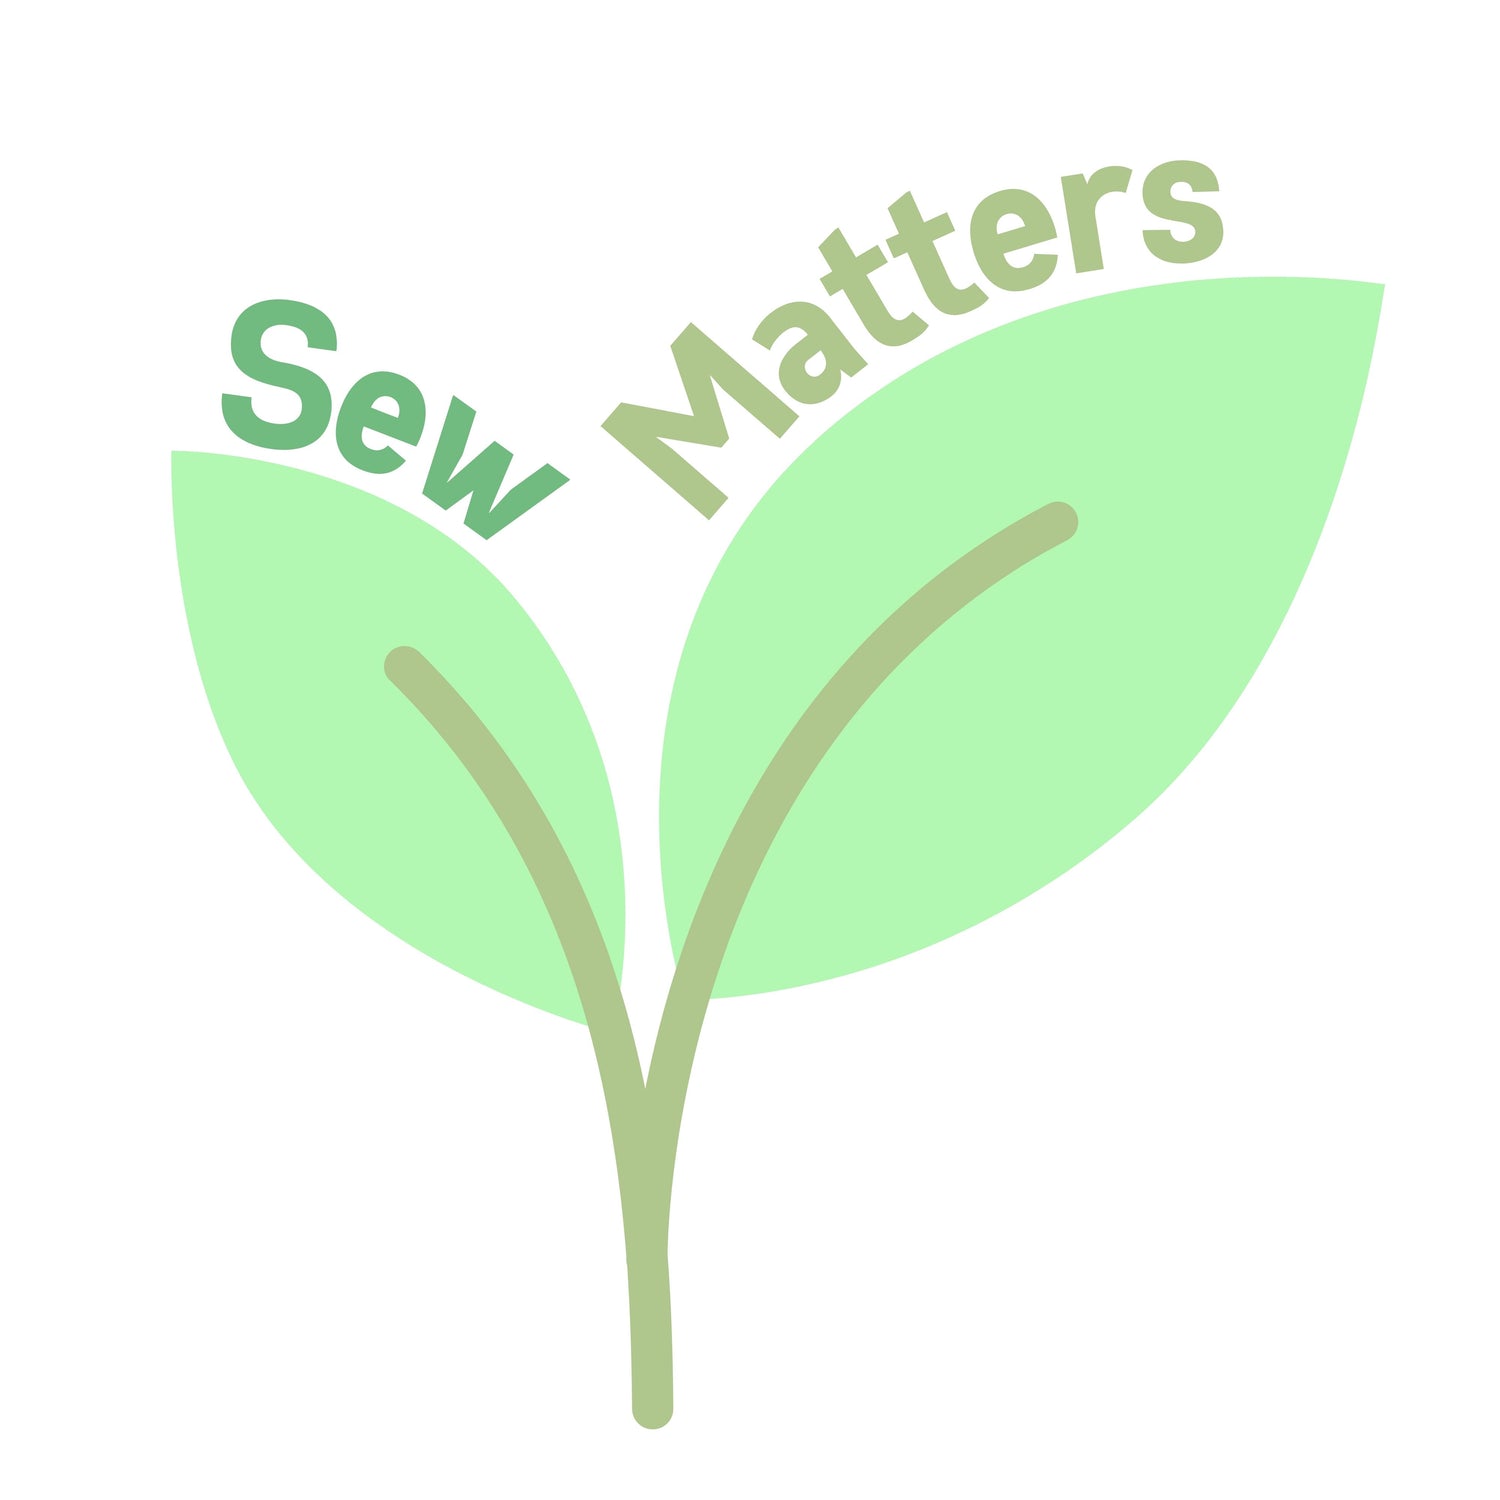 Sew Matters, Sew Eco Fabrics. Transparency on Sustainability Page from Sew Eco Fabrics Sewing Shop.